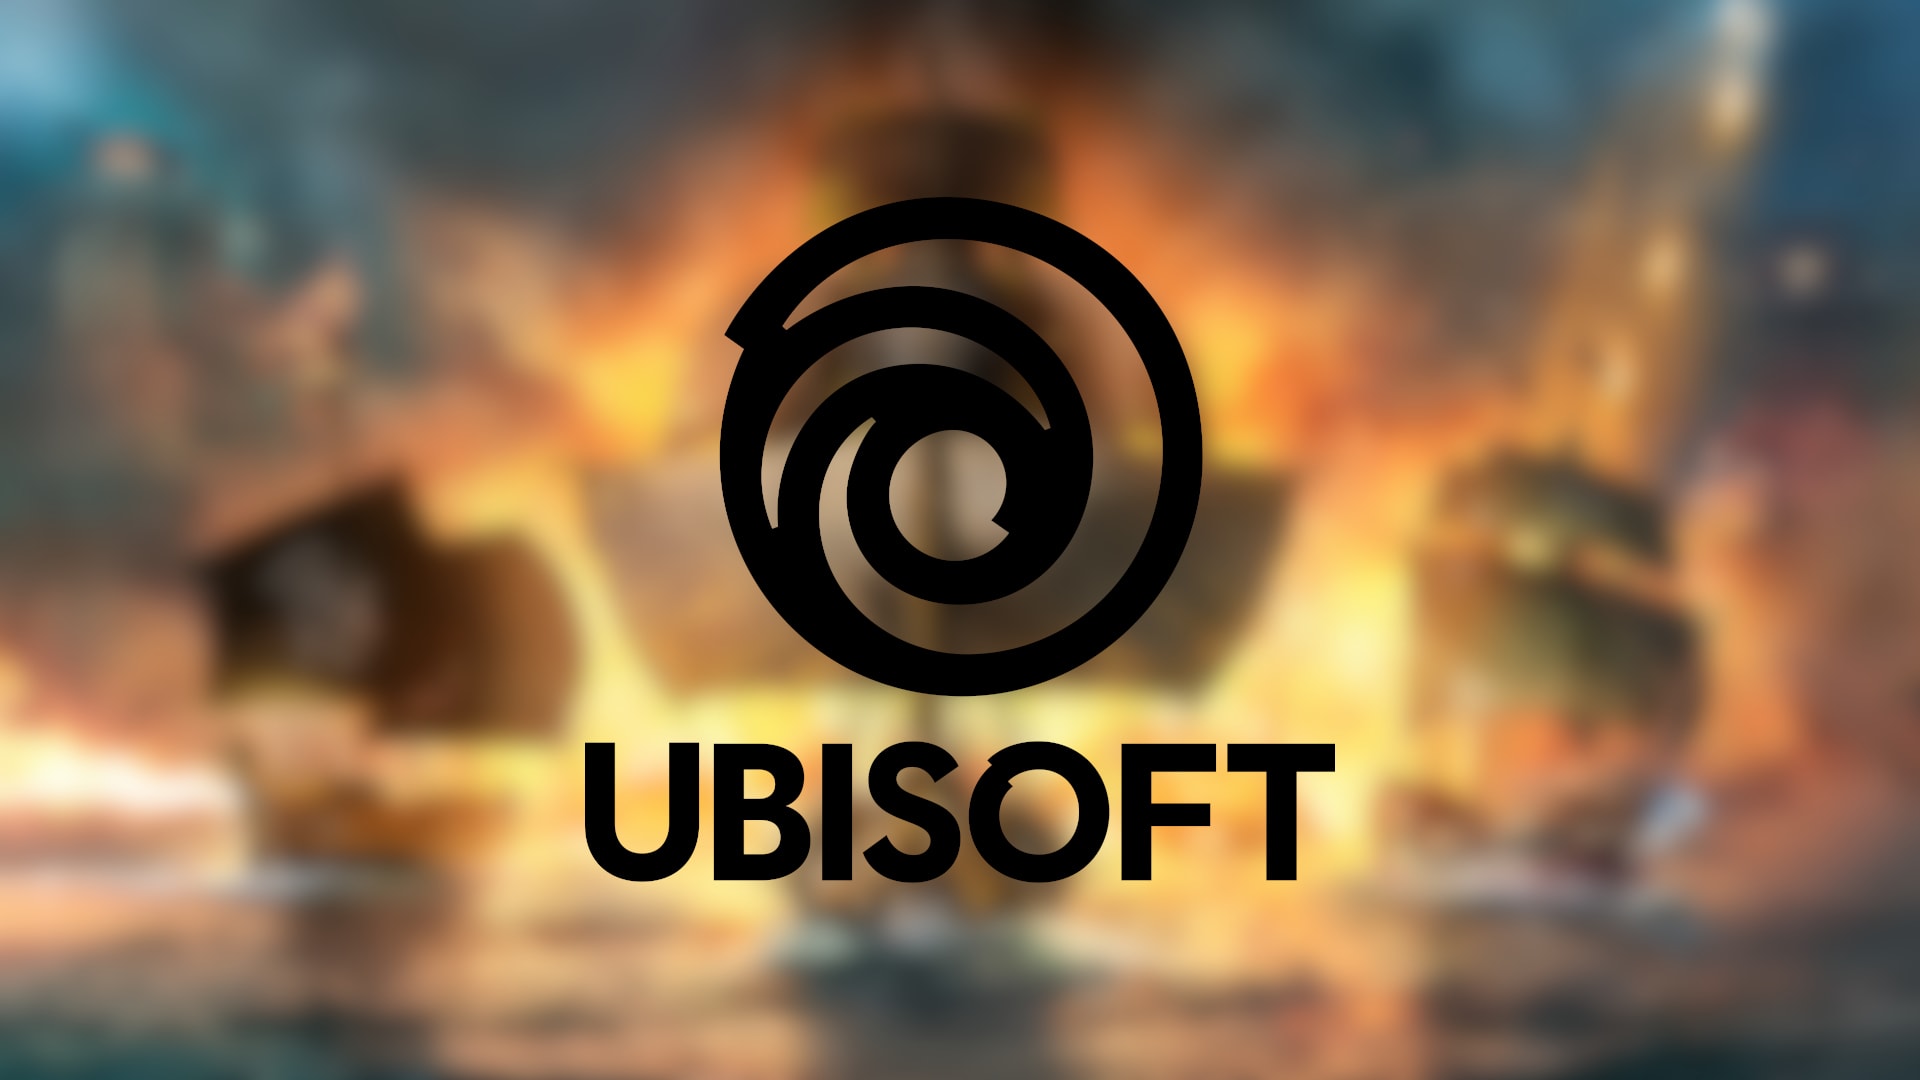 Ubisoft logo in black on top of blurred pirate ships doing battle at sea.